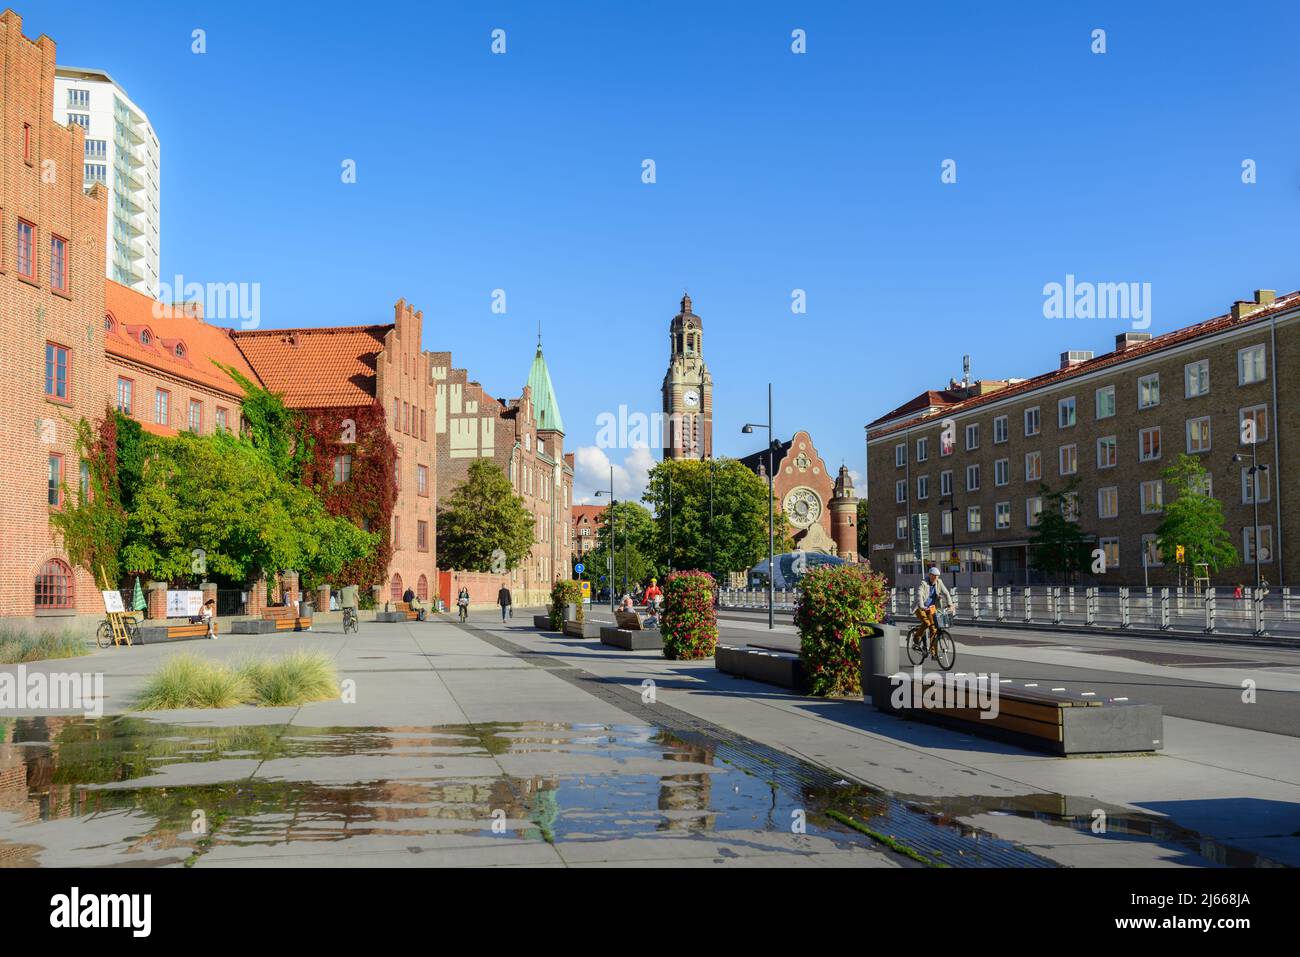 View from small square near Magistratsparken and Hantverkshuset to St. John's Church and Triangeln station. Stock Photo